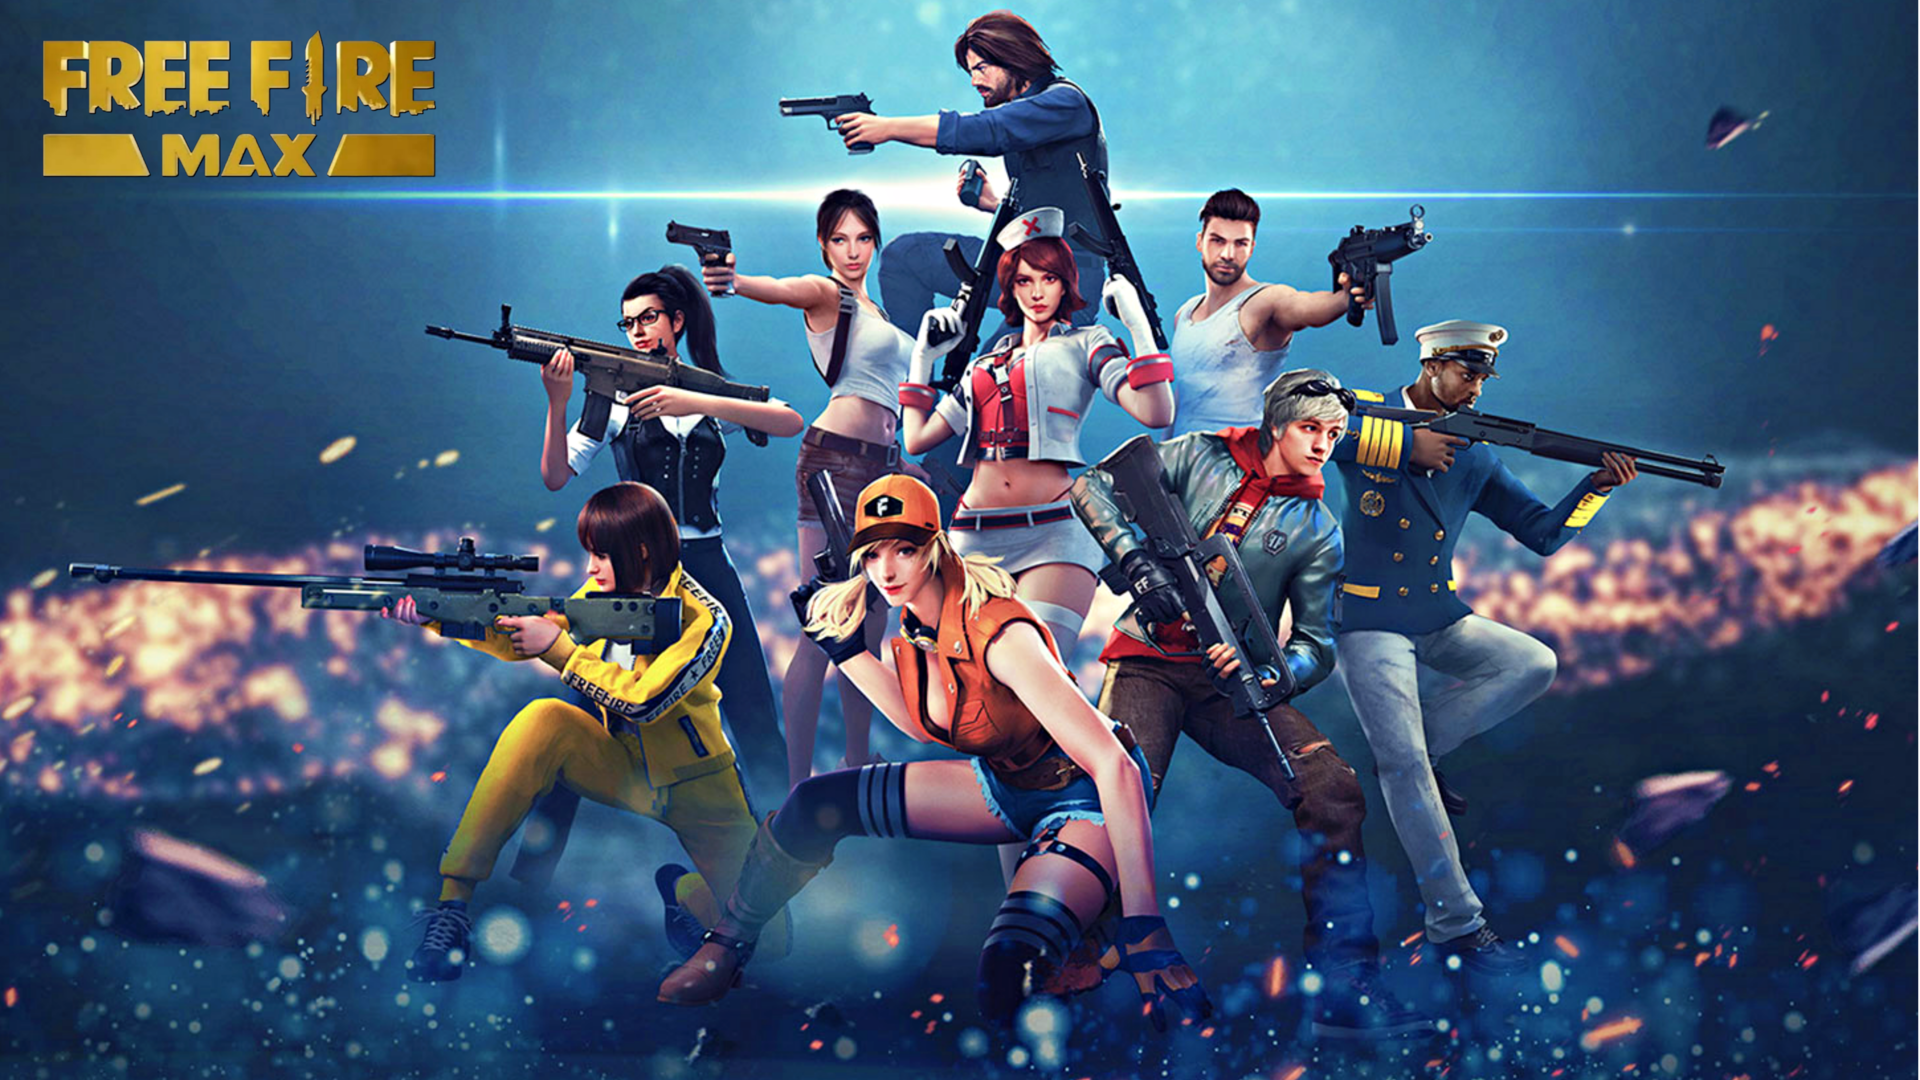 Free Fire MAX codes for April 16: How to redeem